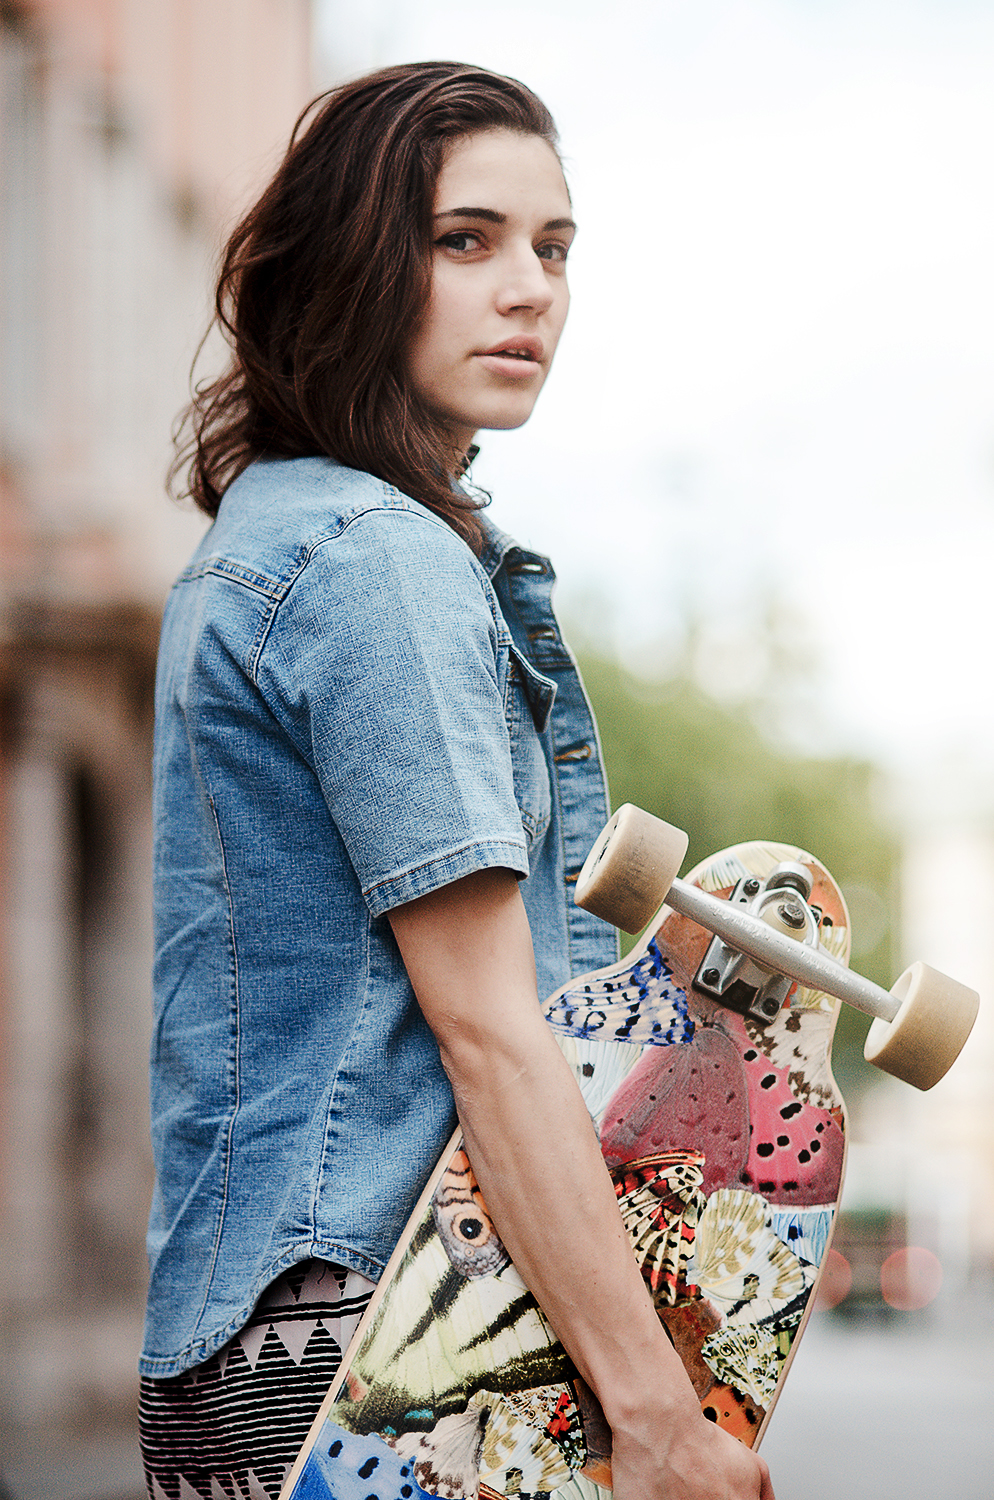 model Hipster LONGBOARD outfit commercial